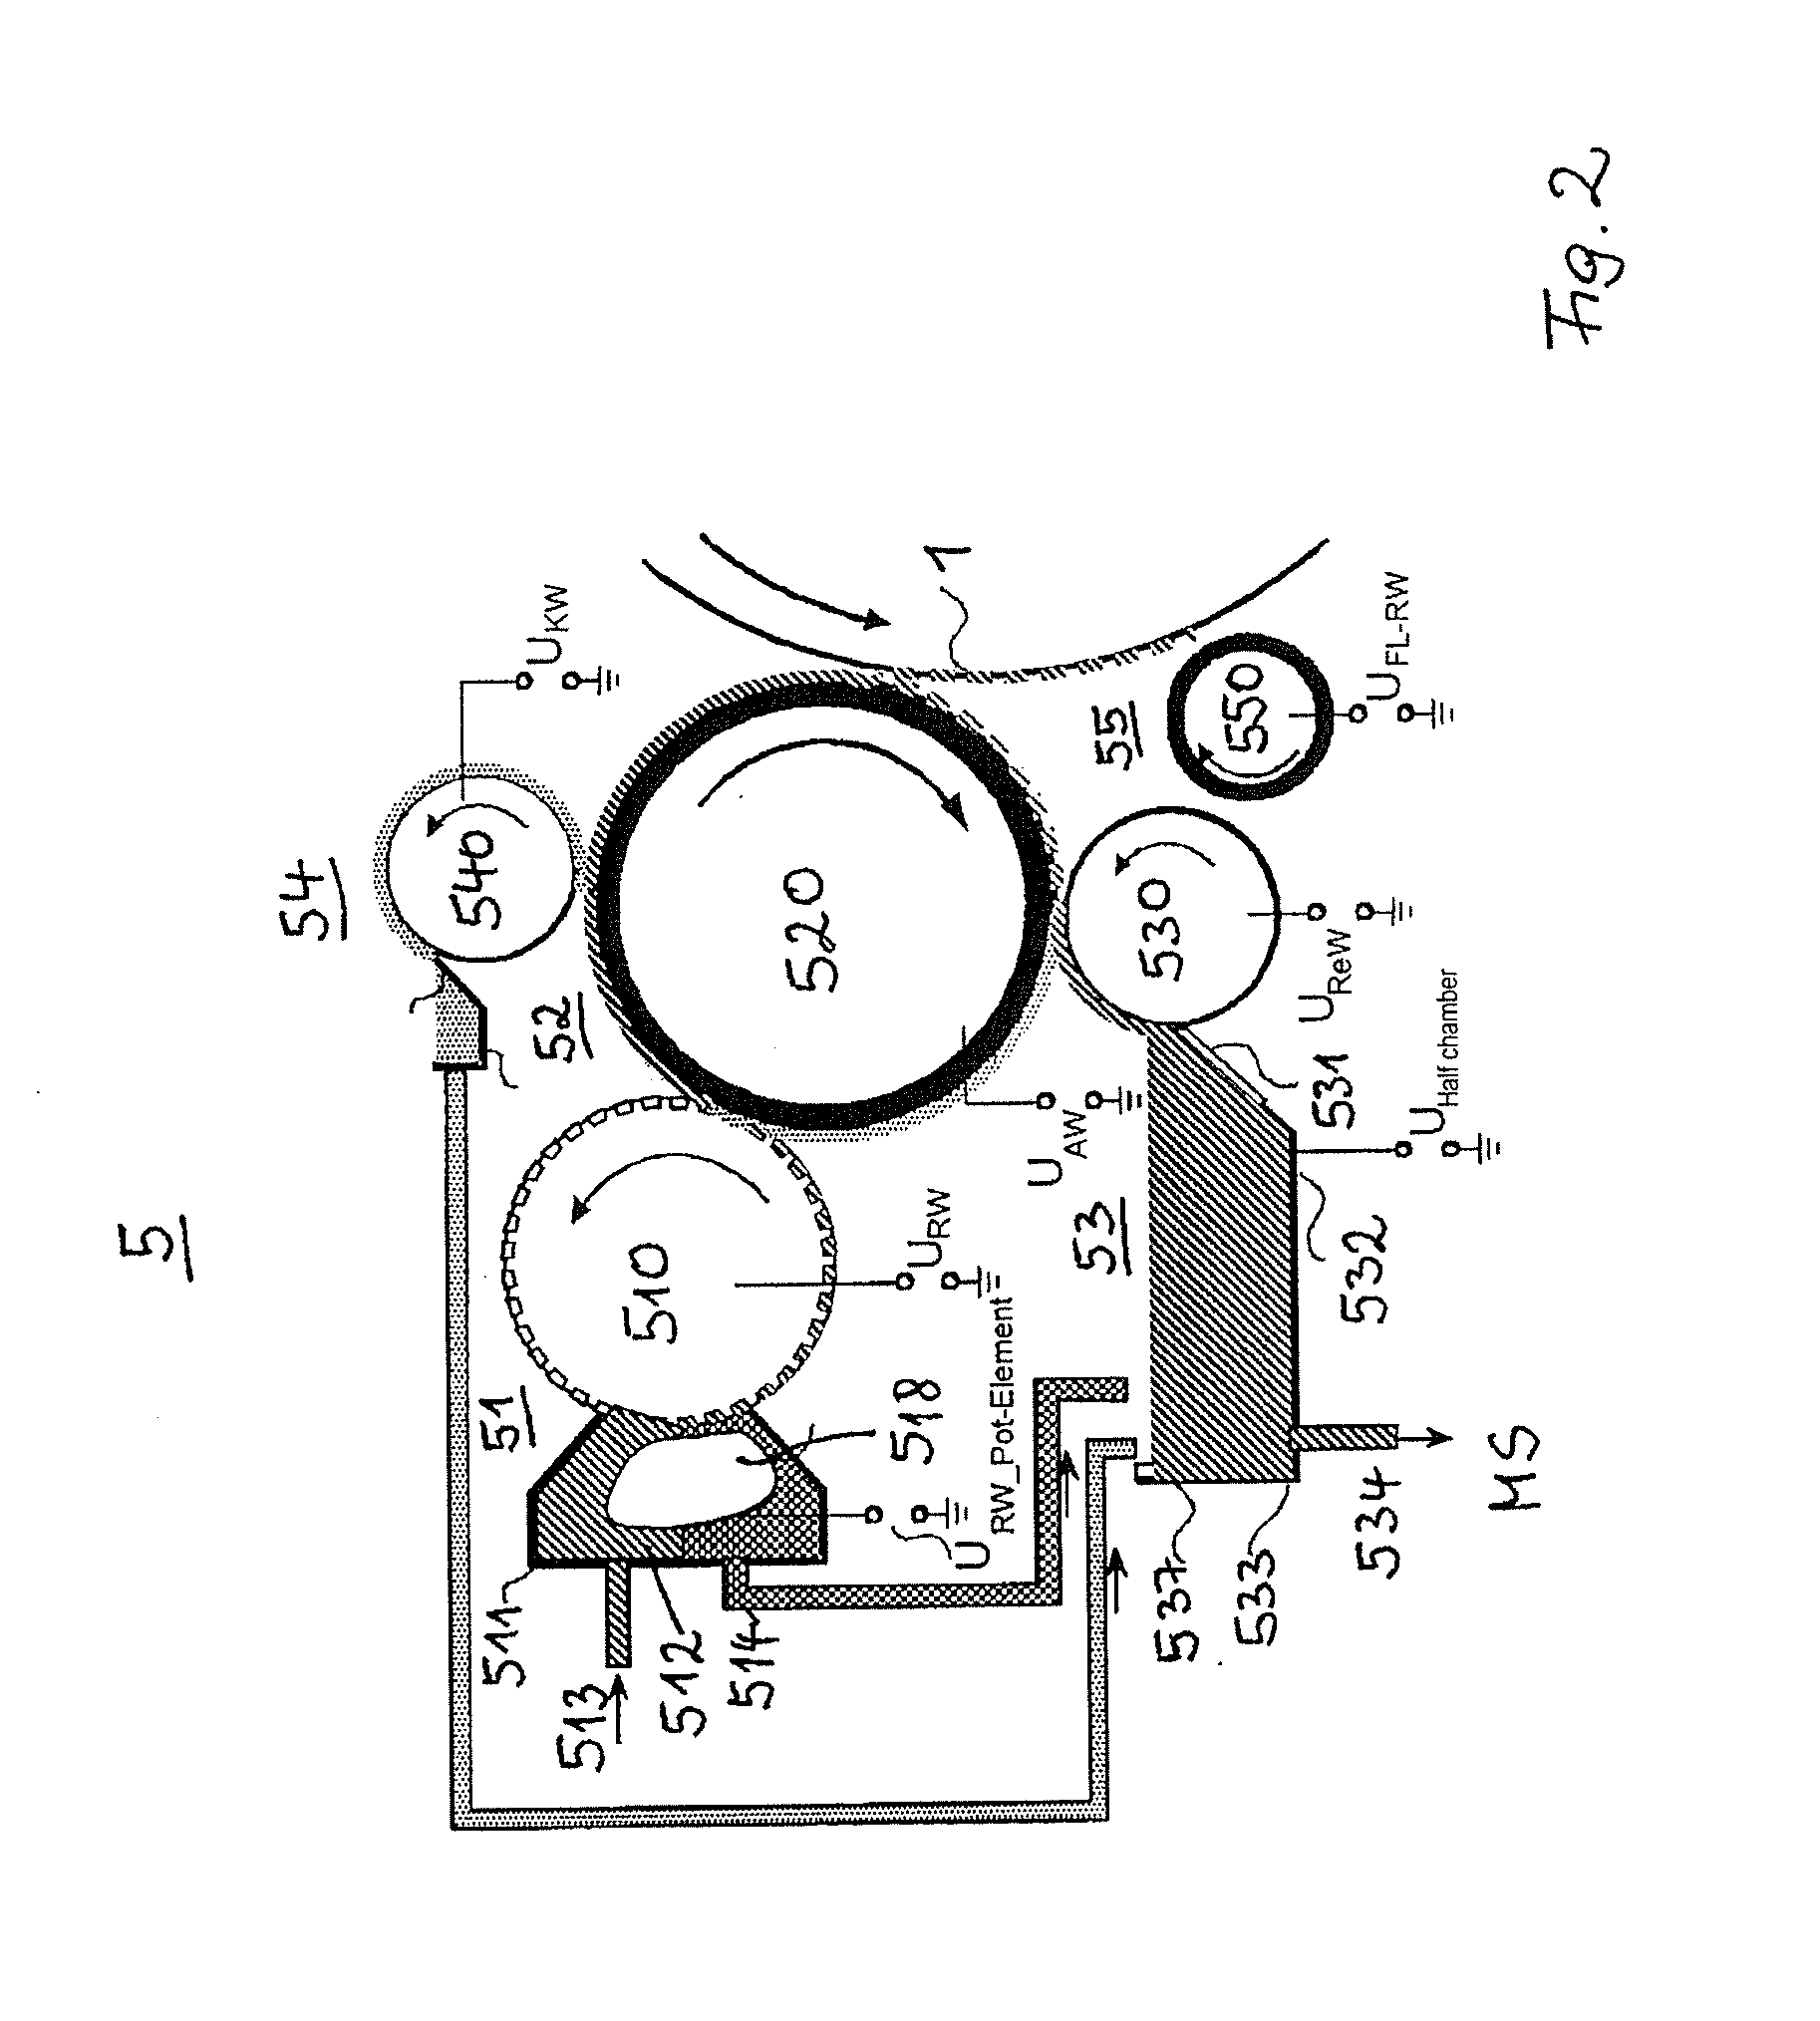 Device and method to develop potential images generated on an intermediate image carrier in an electrographic printing or copying device